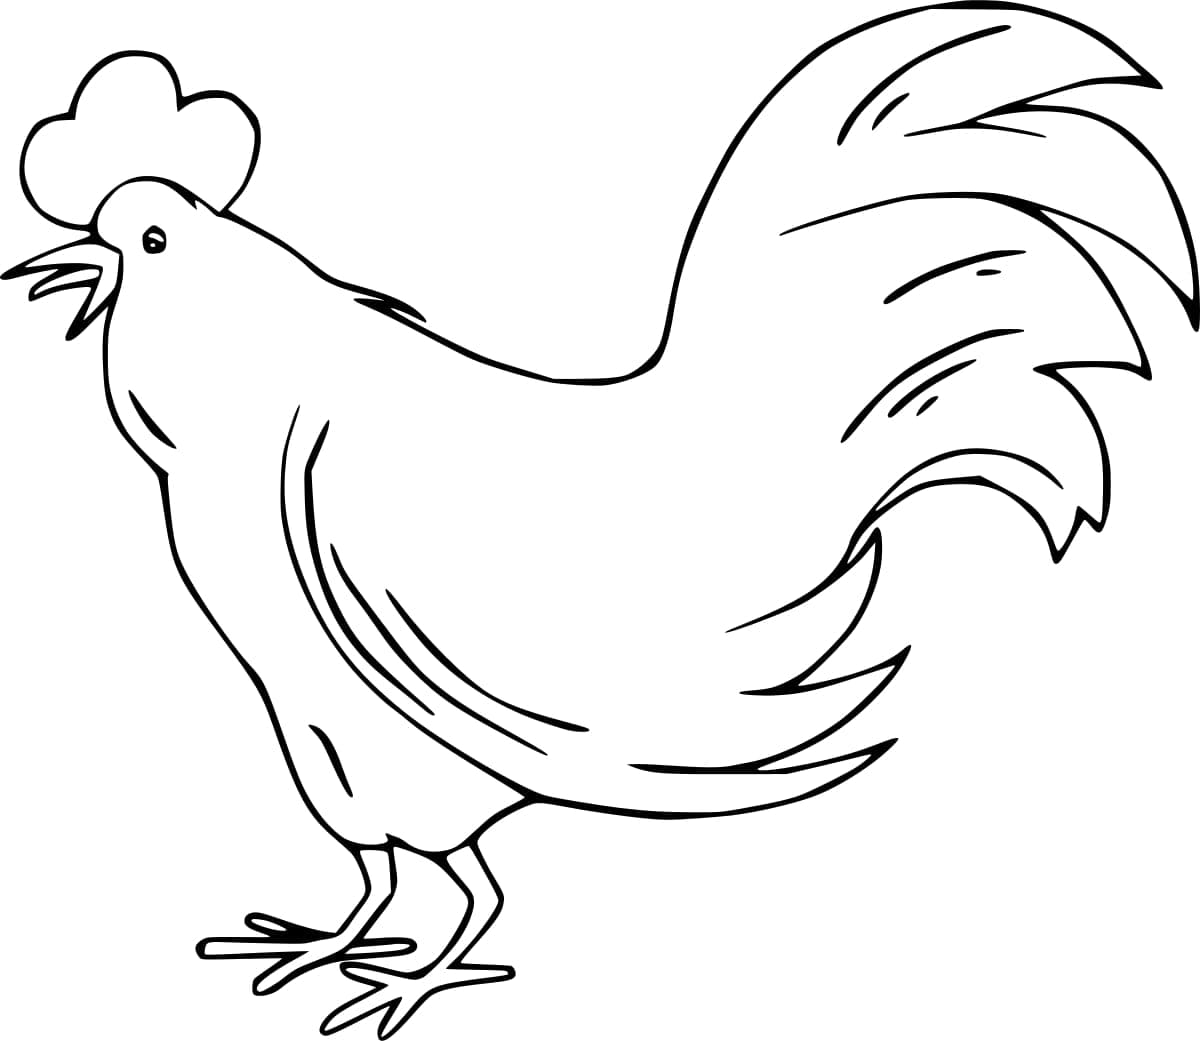 Coq Simple coloring page